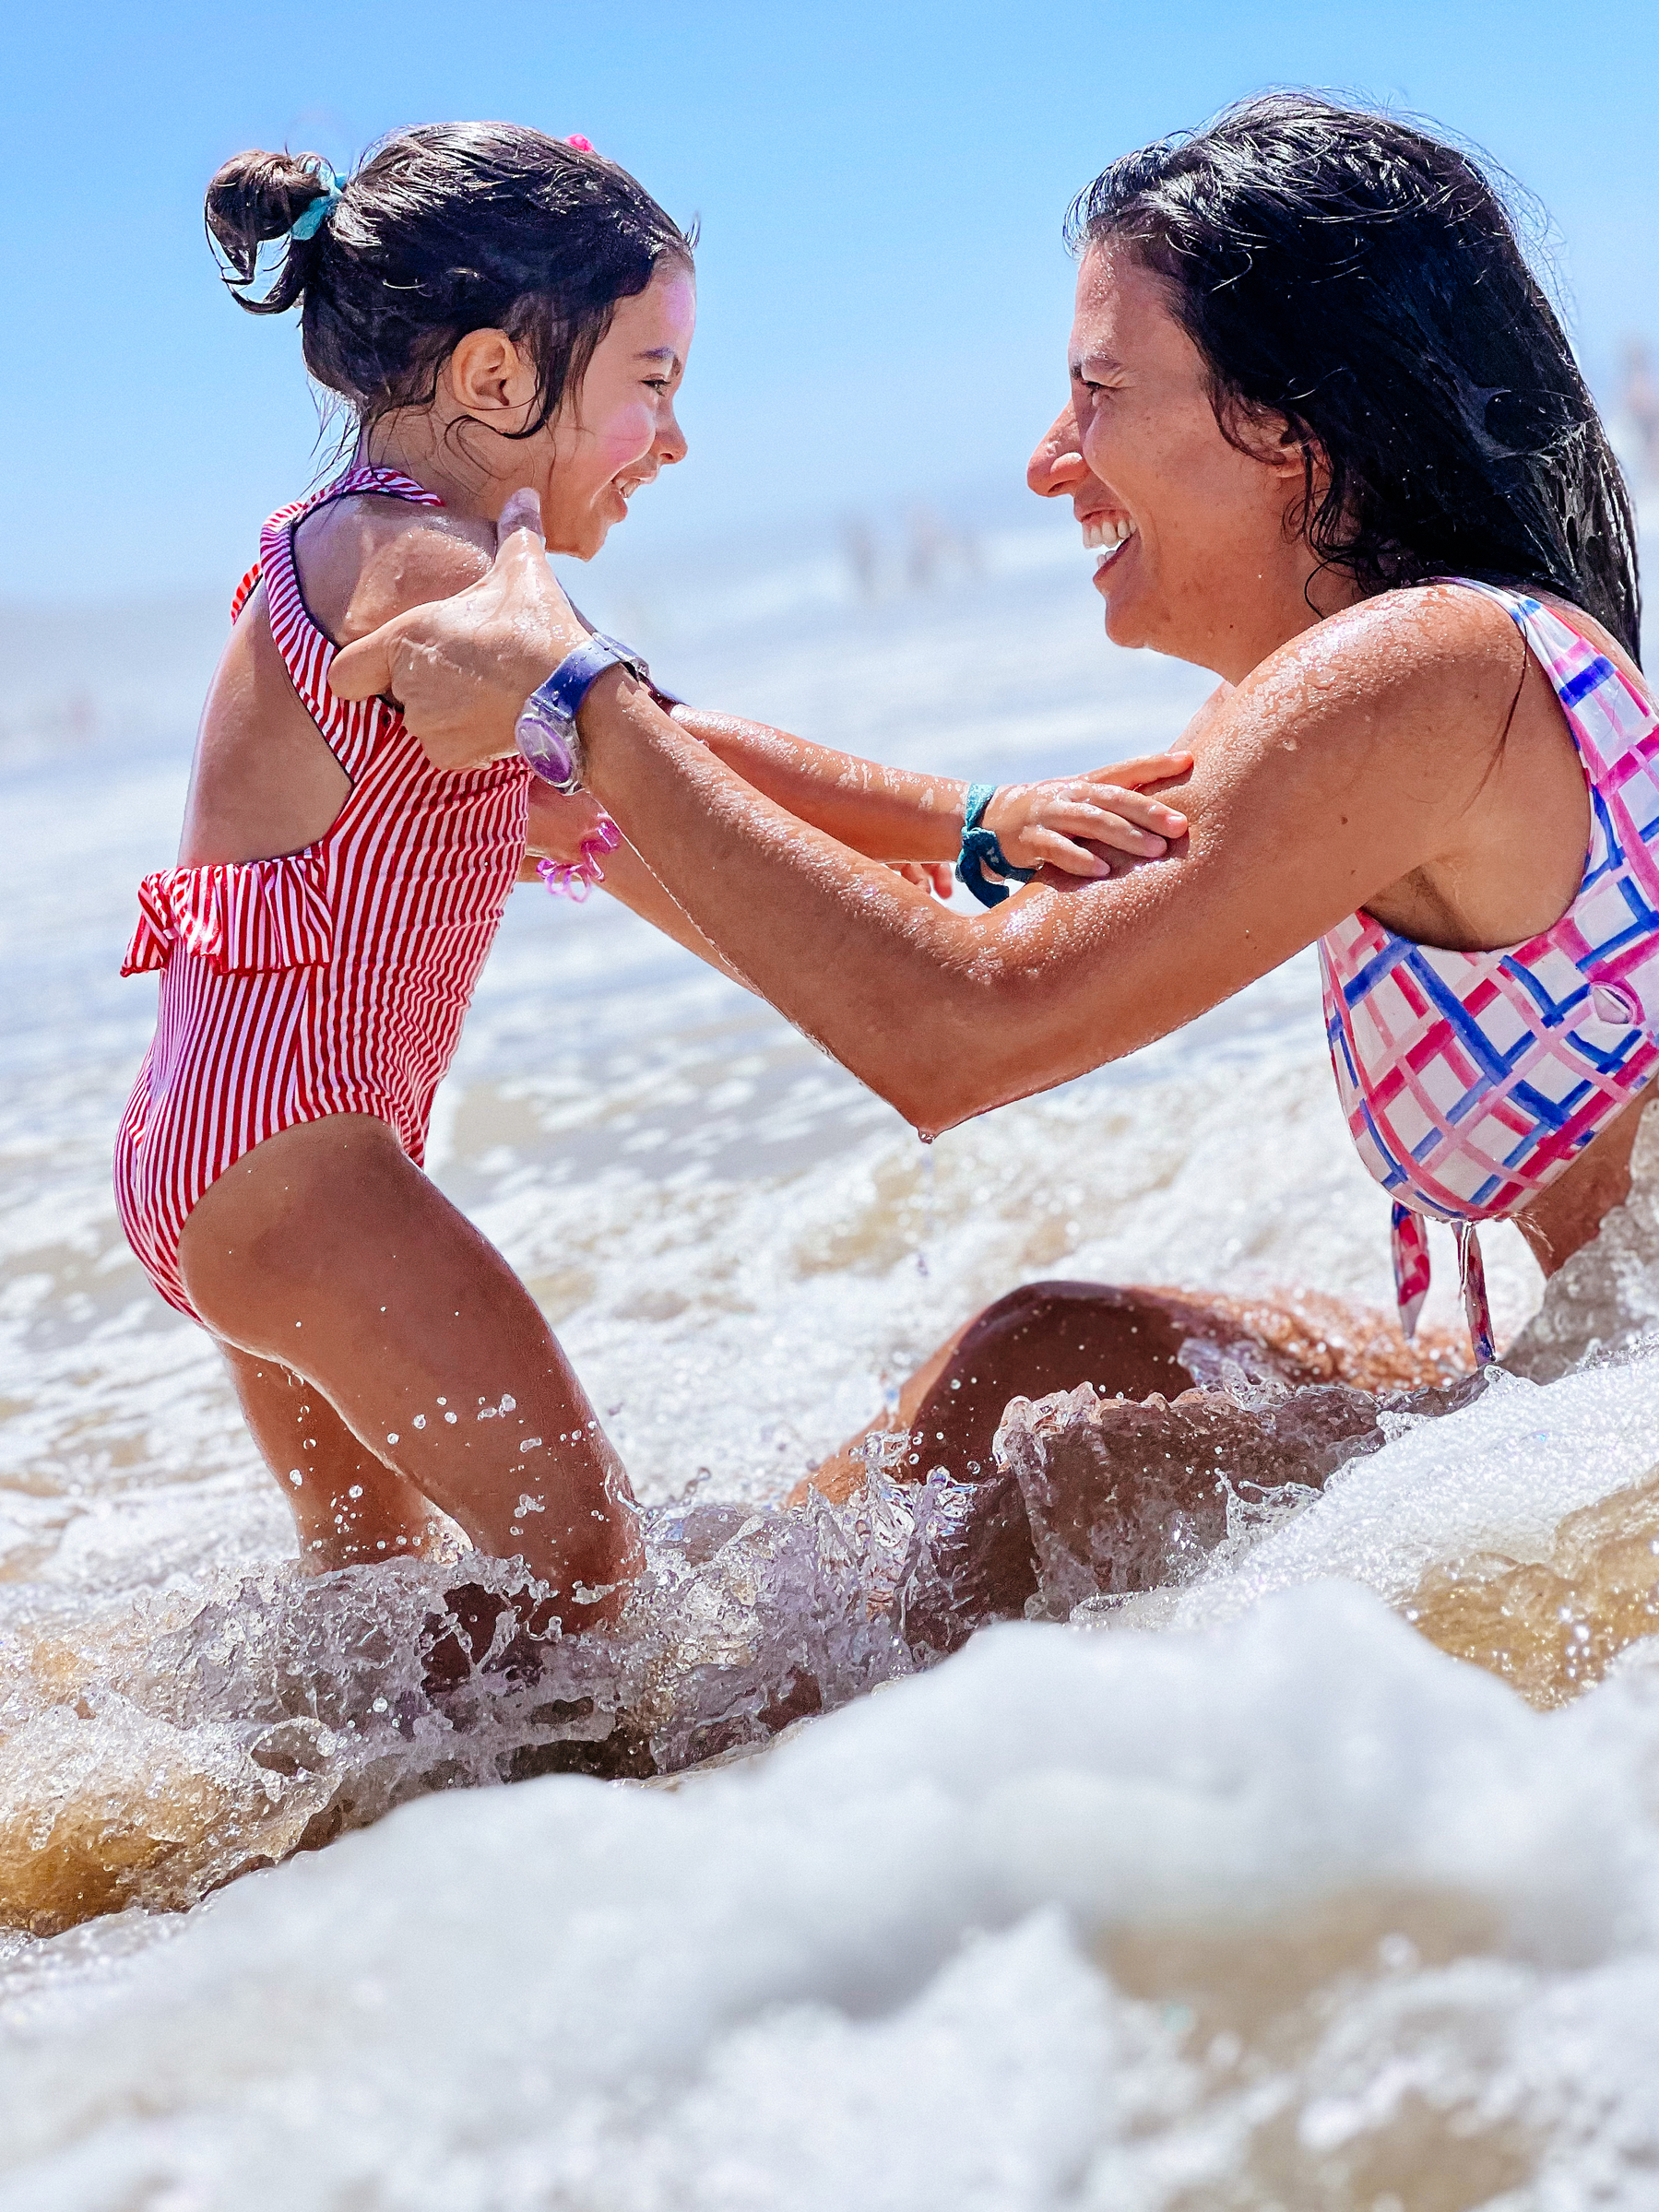 A girl and a woman play in the sea, smiling.  